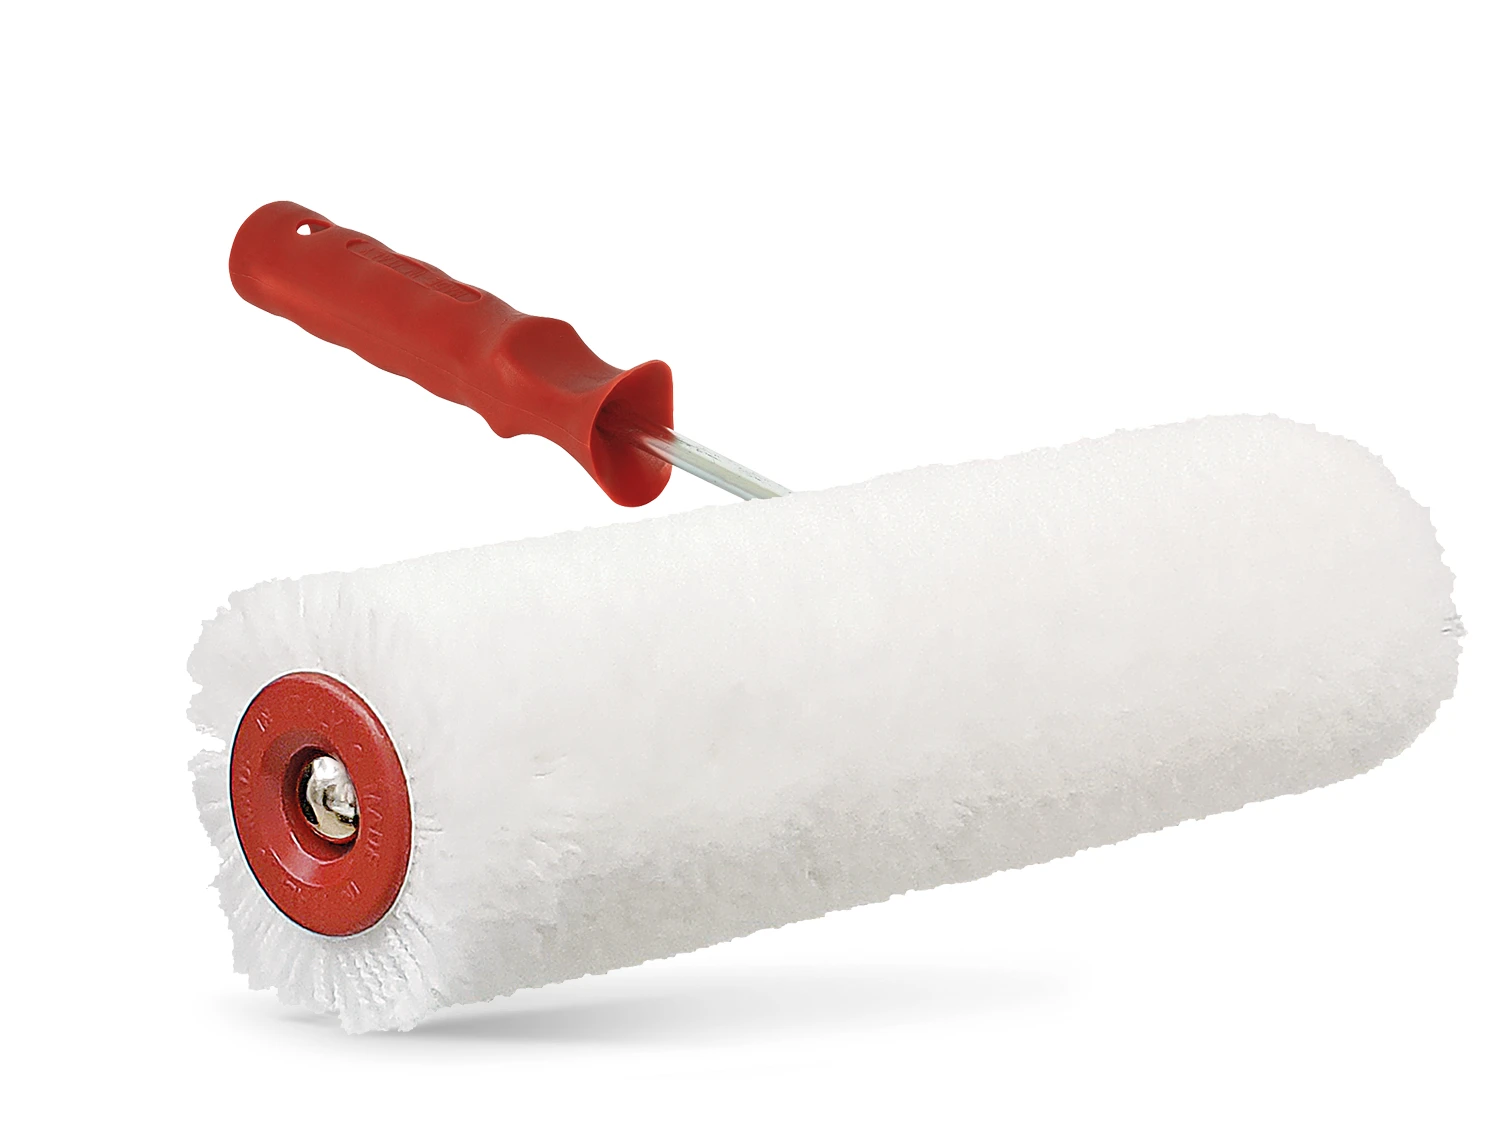 A02 – TWISTED ACRYLIC PAINT ROLLER